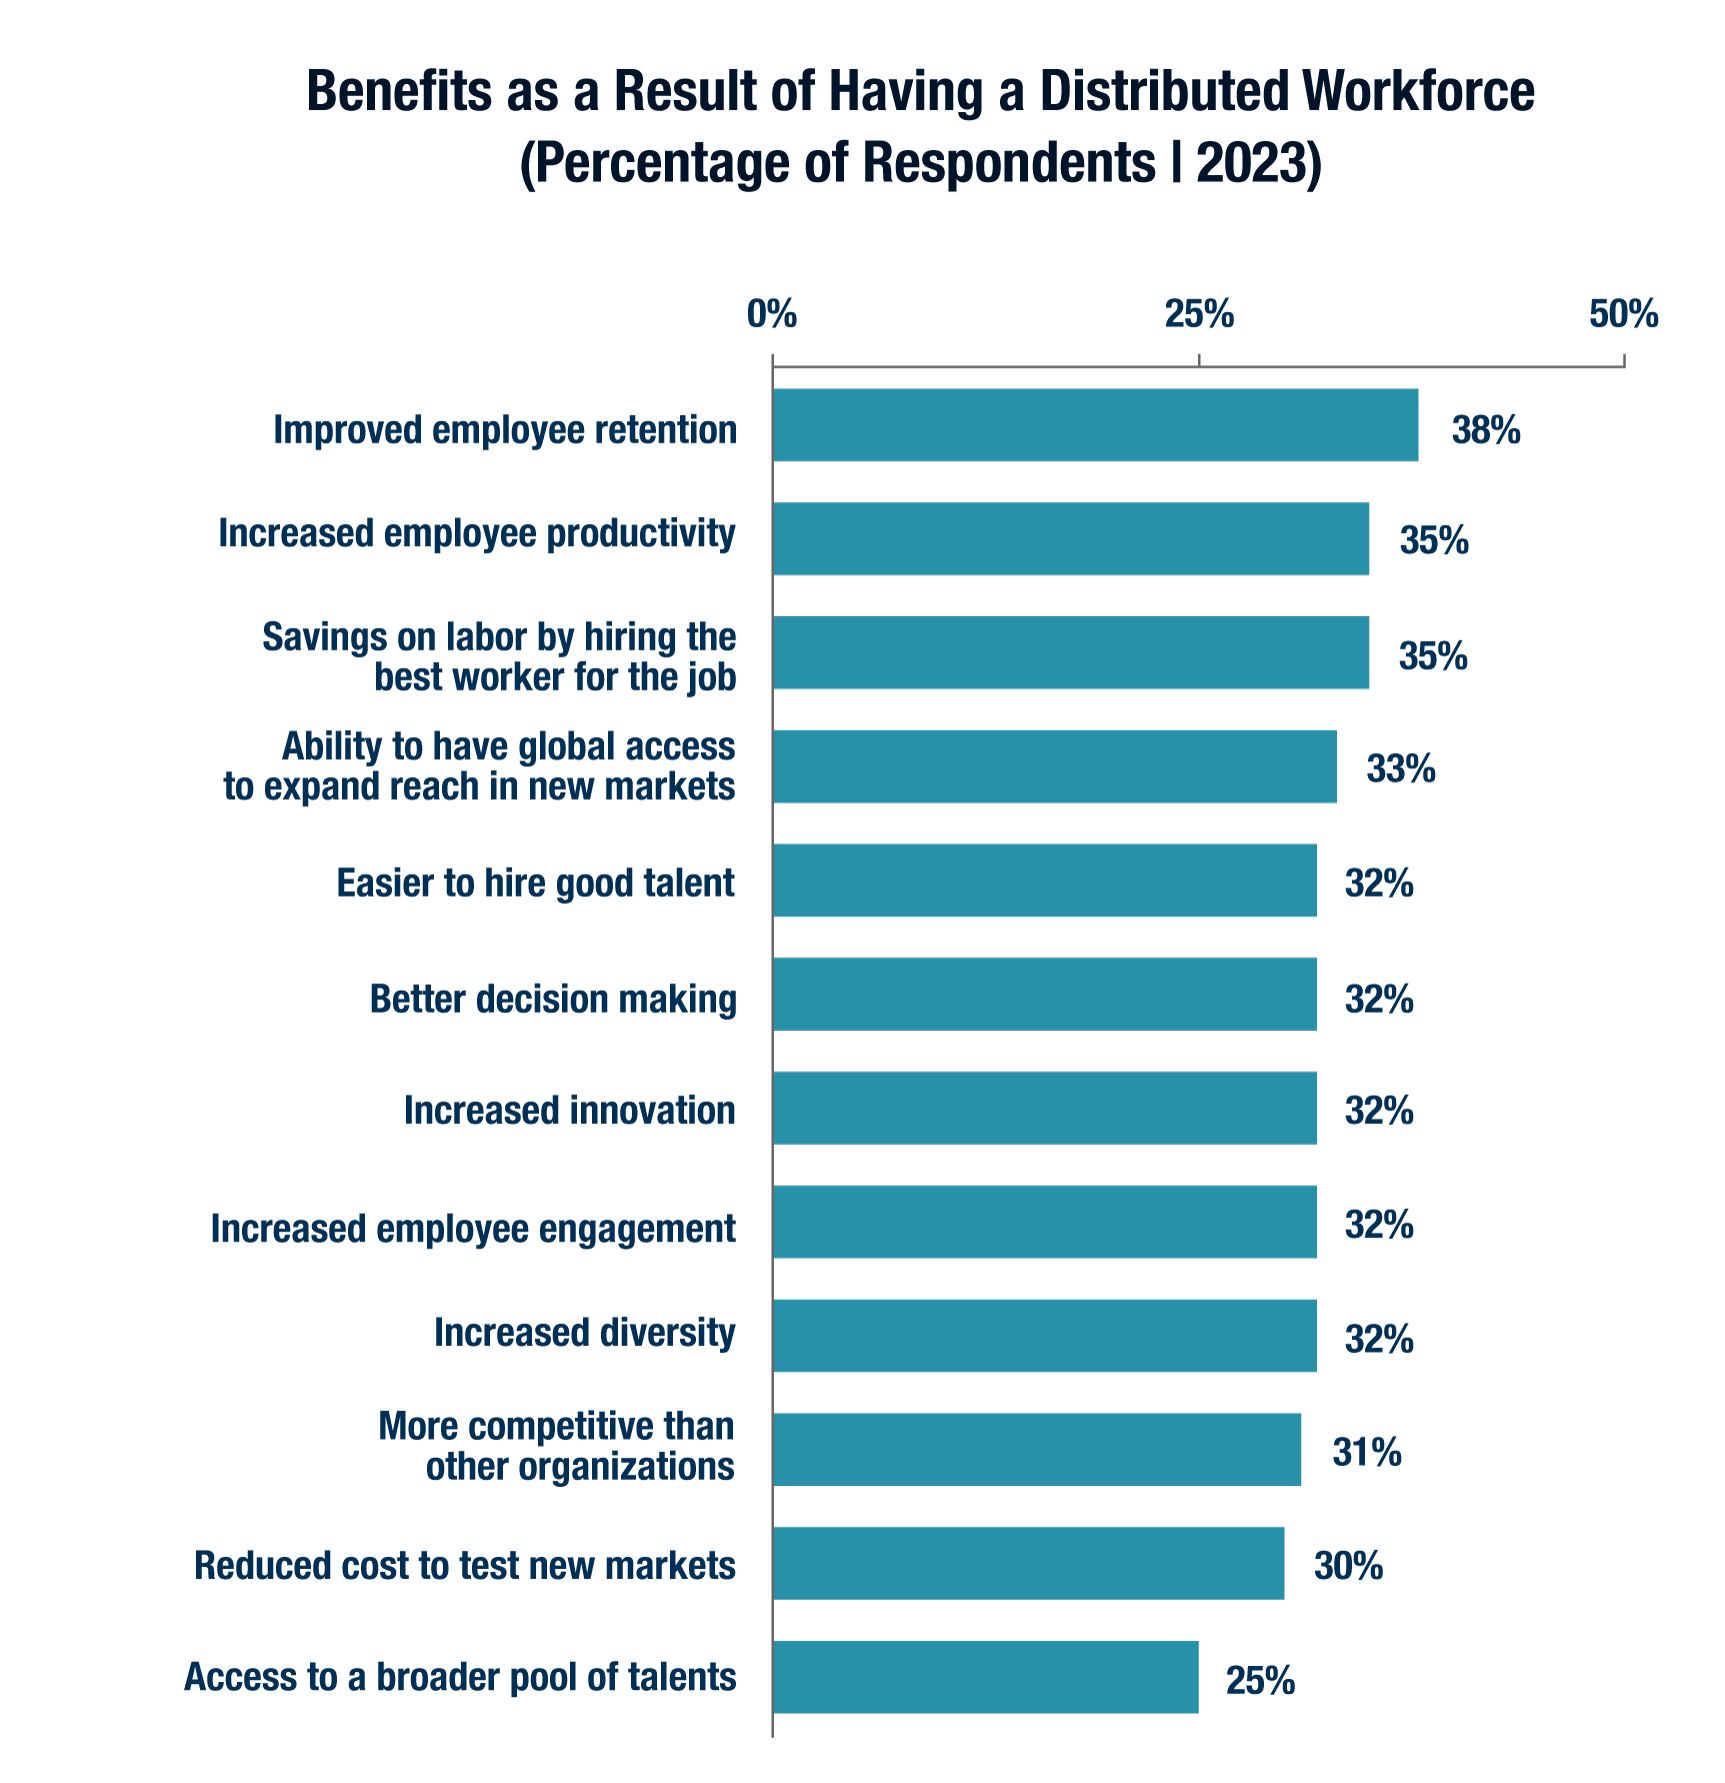 Benefits as a result of having a distributed workforce (percentage of respondents in 2023). Top 3 benefits are improved employee retention (38%), increased employee productivity (35%), and savings on labor by hiring the best worker for the job (35%).